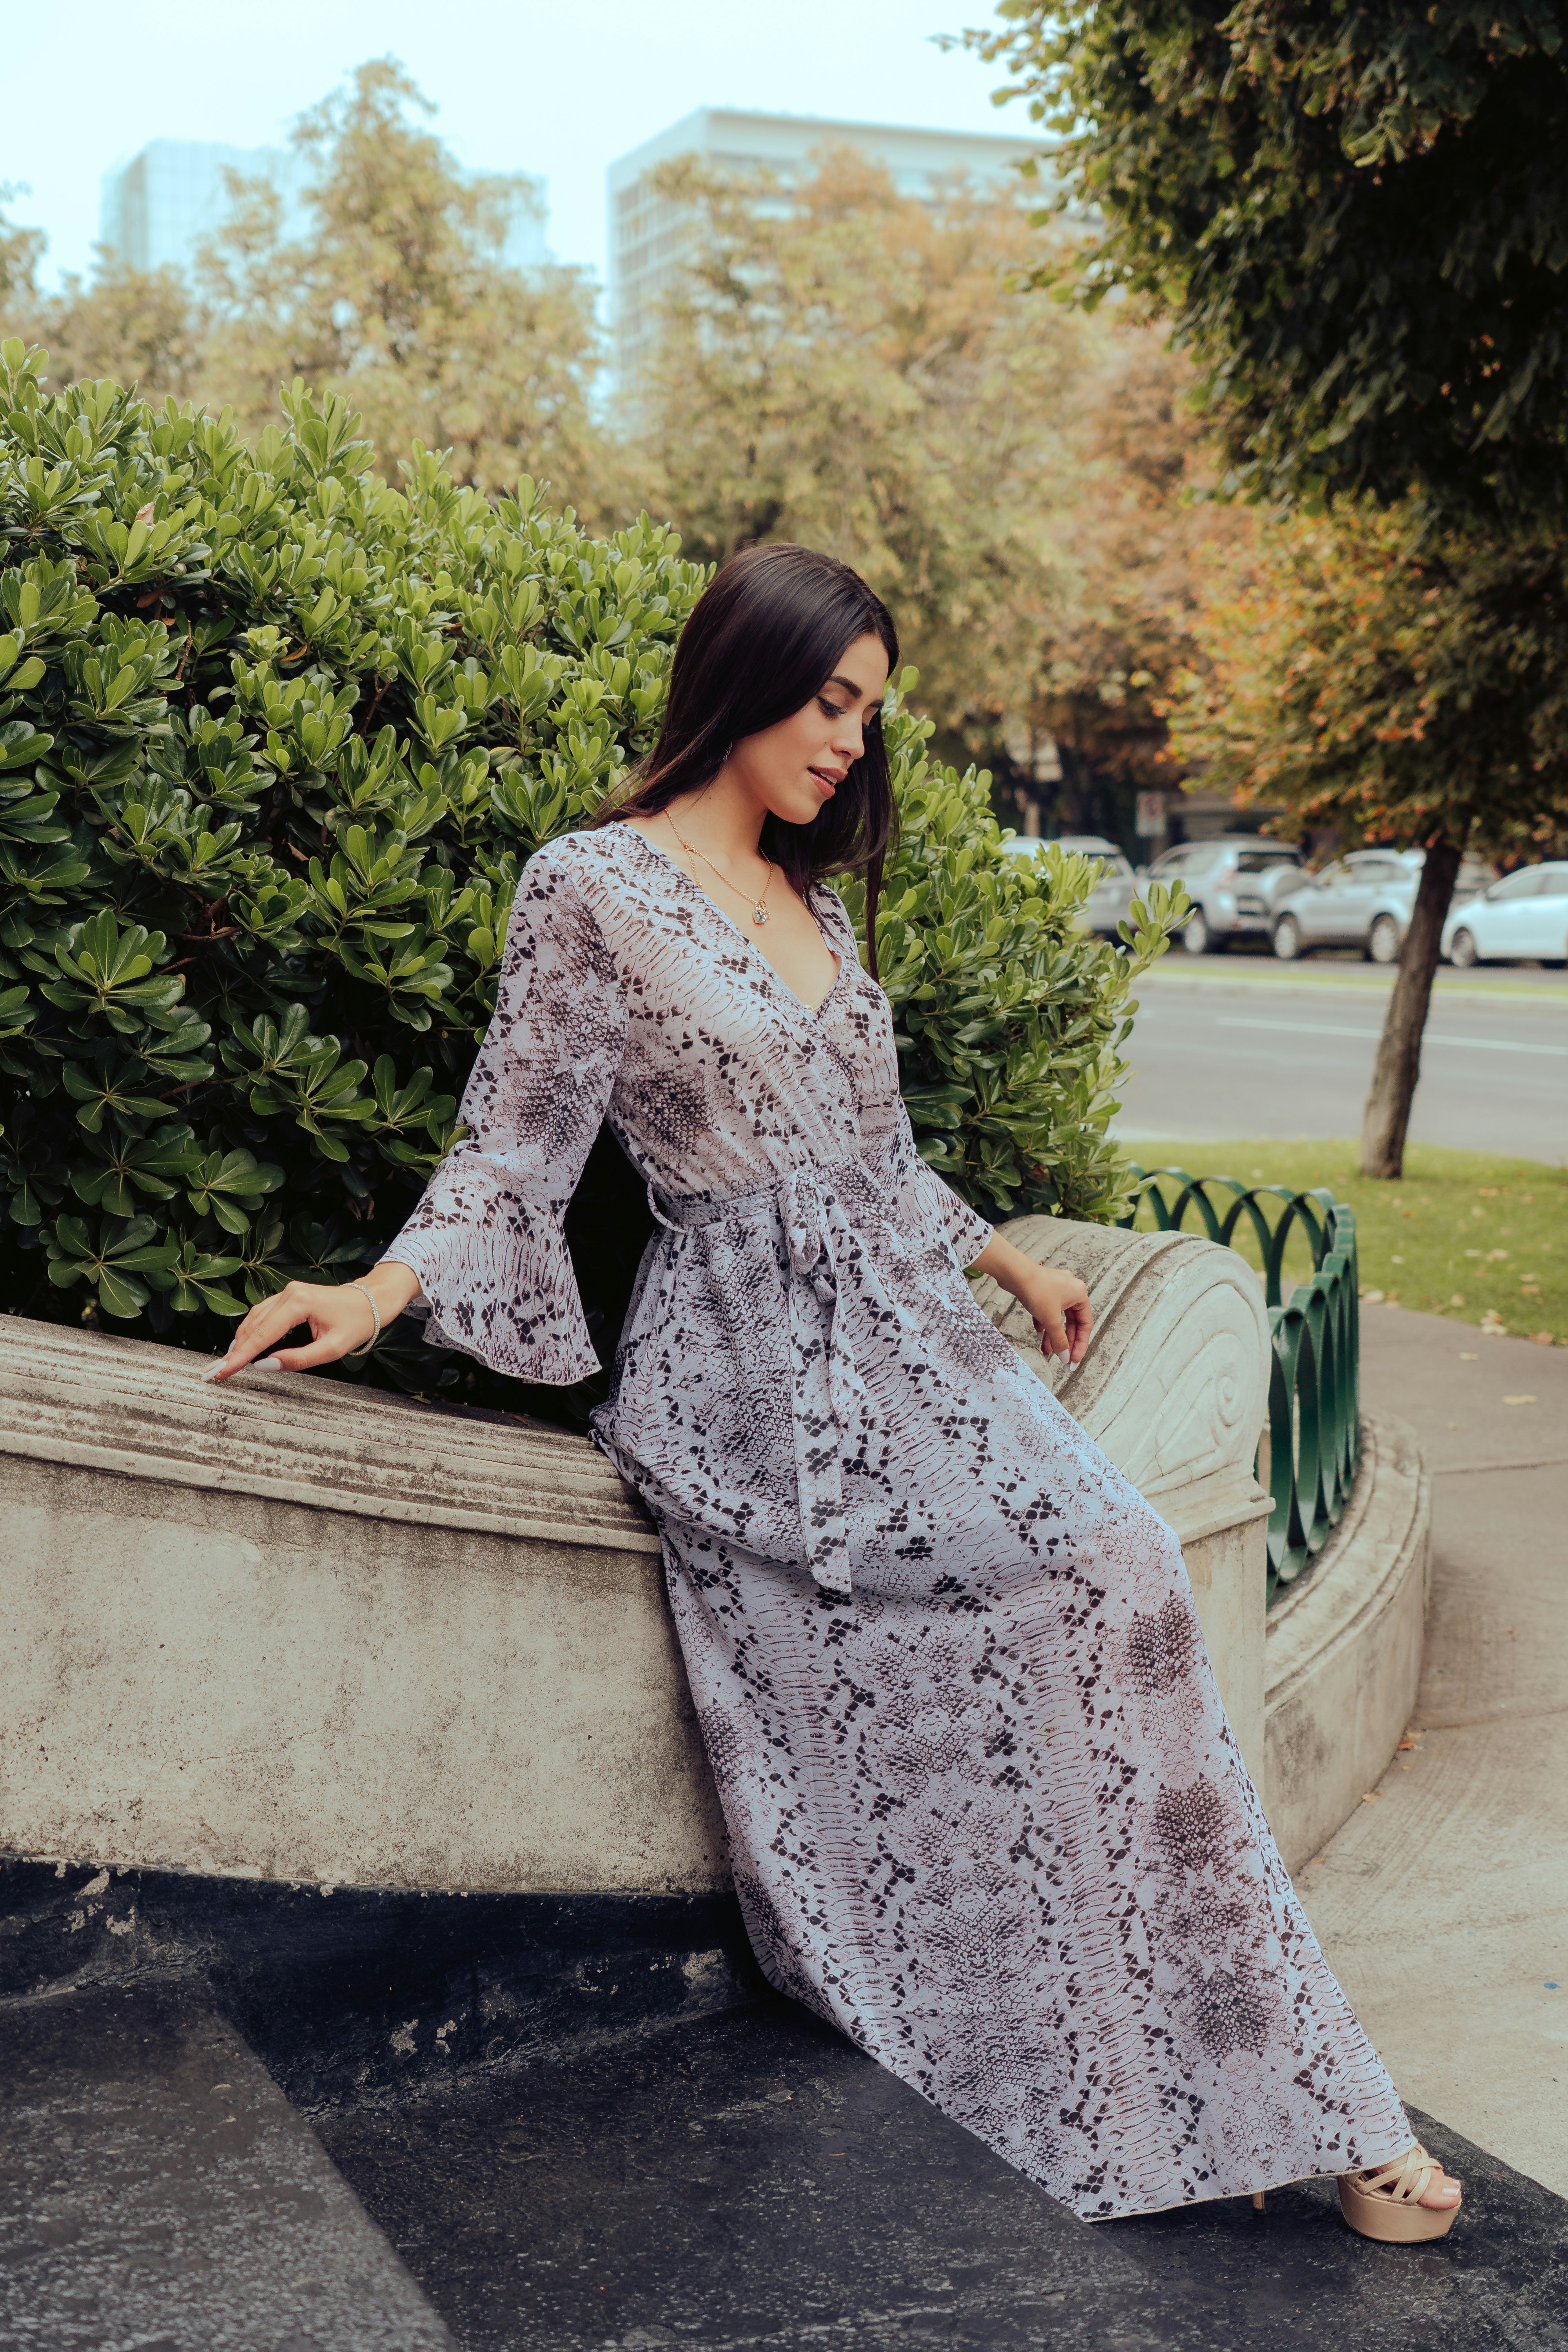 woman in gray floral dress sitting on concrete bench